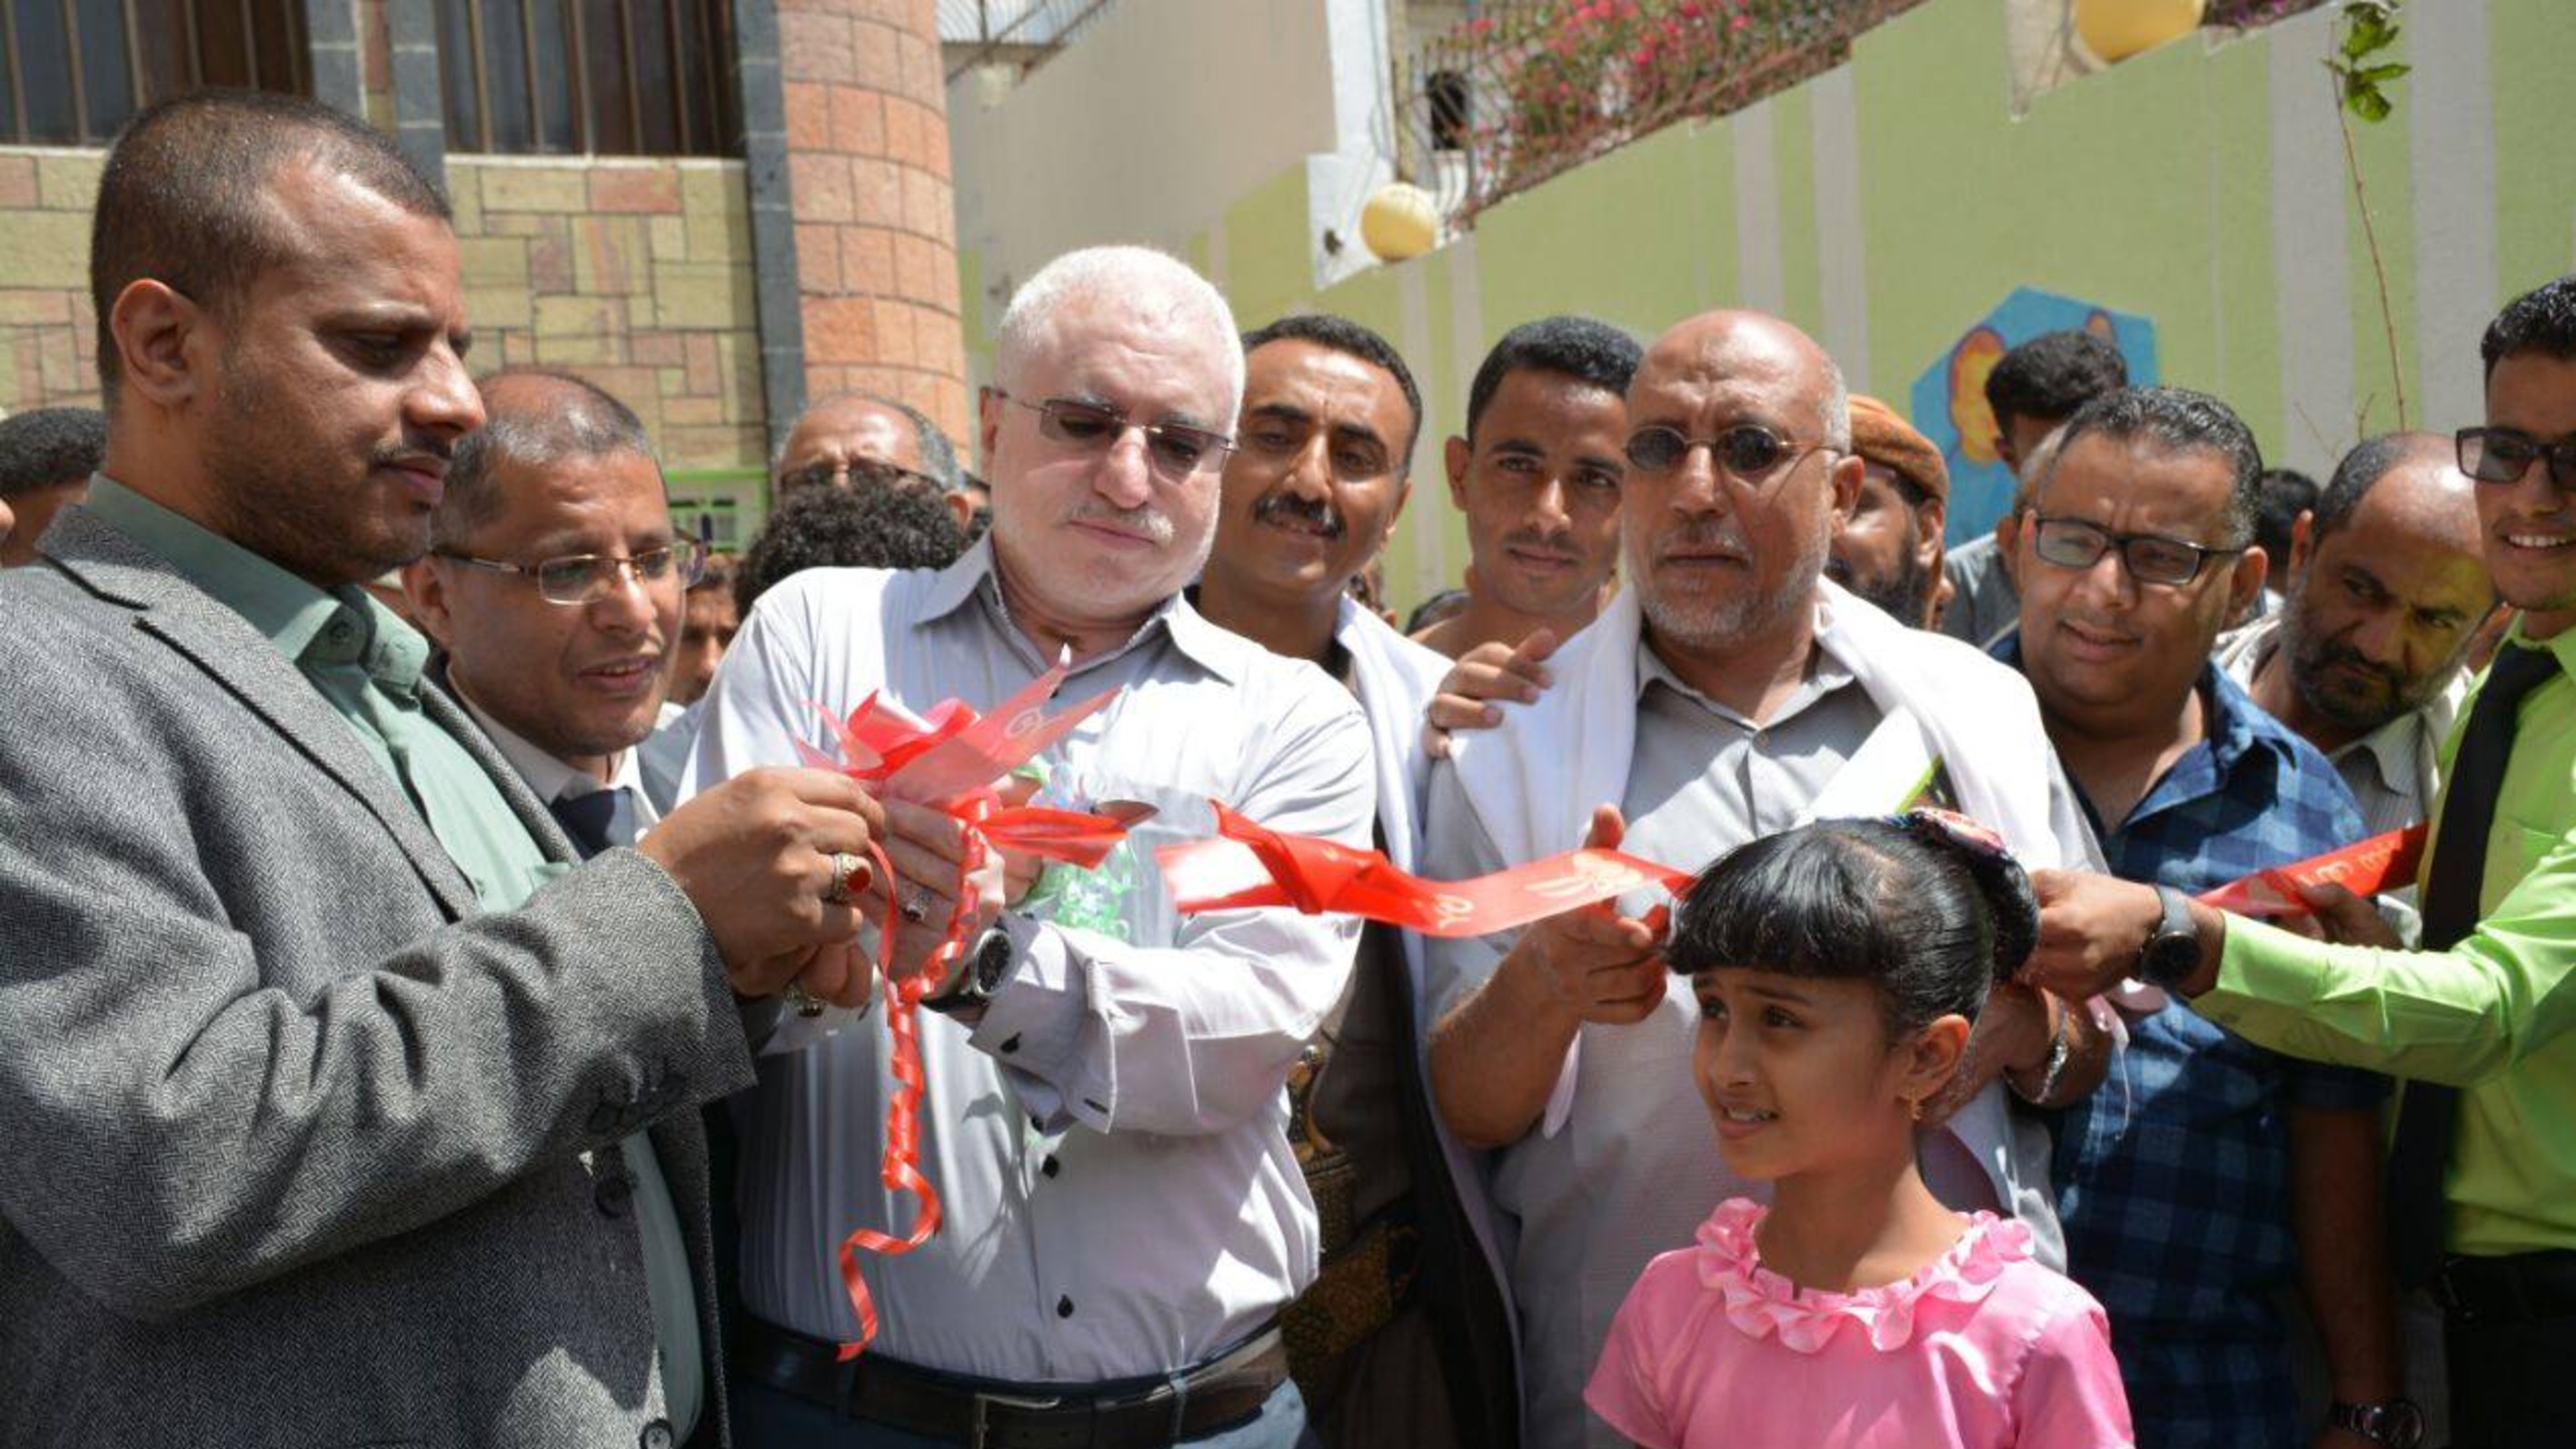 TKF Opens a Care Center For Physiotherapy Treatment in Taiz